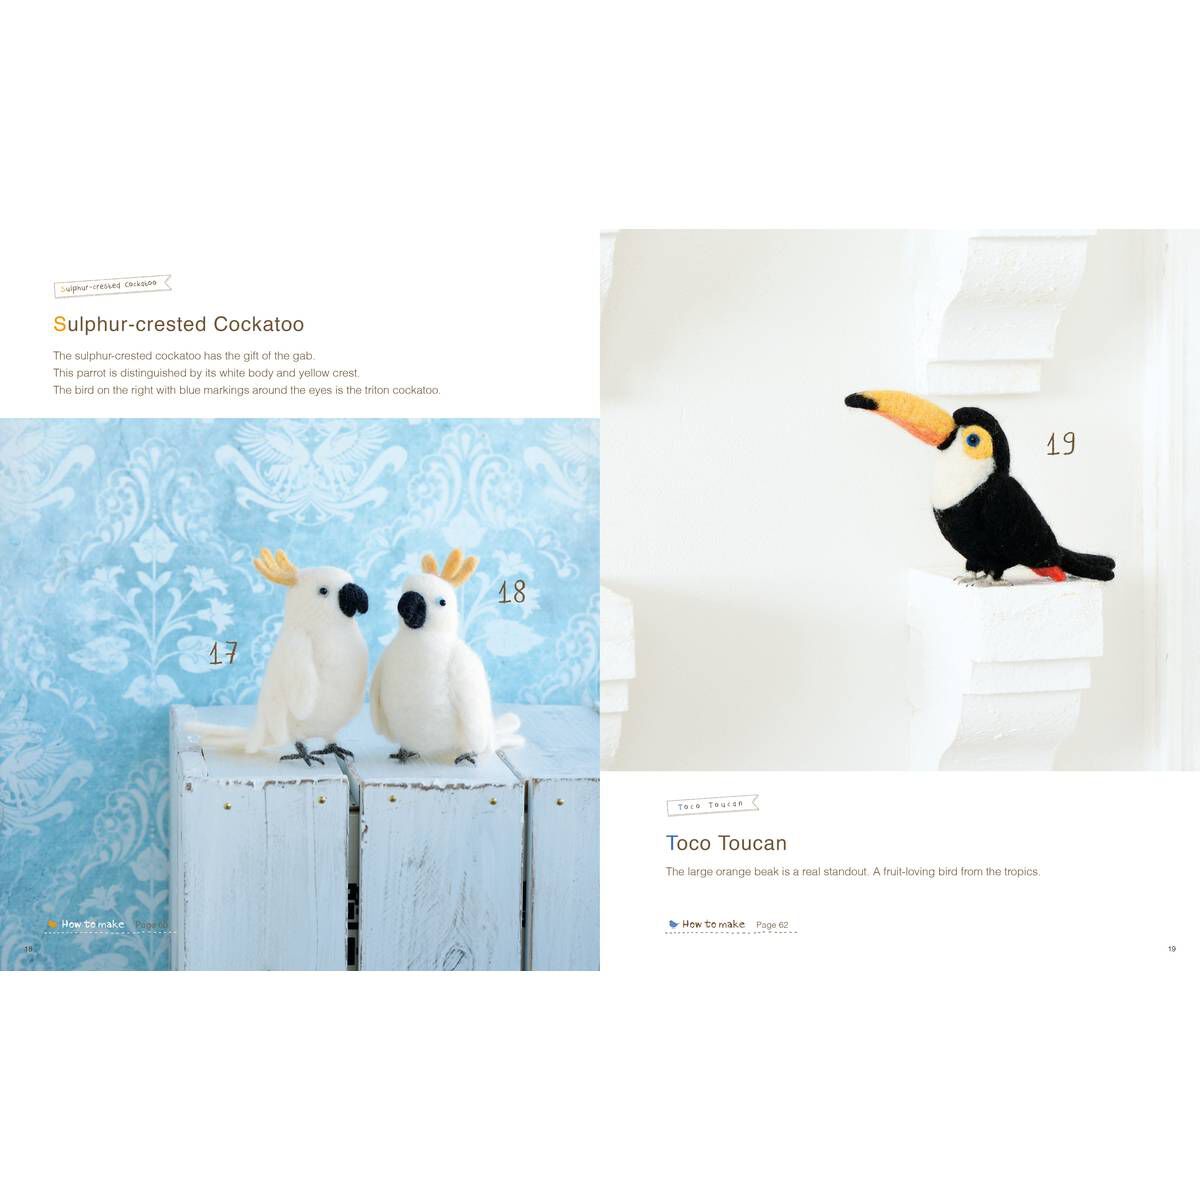 Cute Birds to Make with Needle Felting: 35 Clearly Explained Projects with Step-by-Step Instructions - Thread Collective Australia